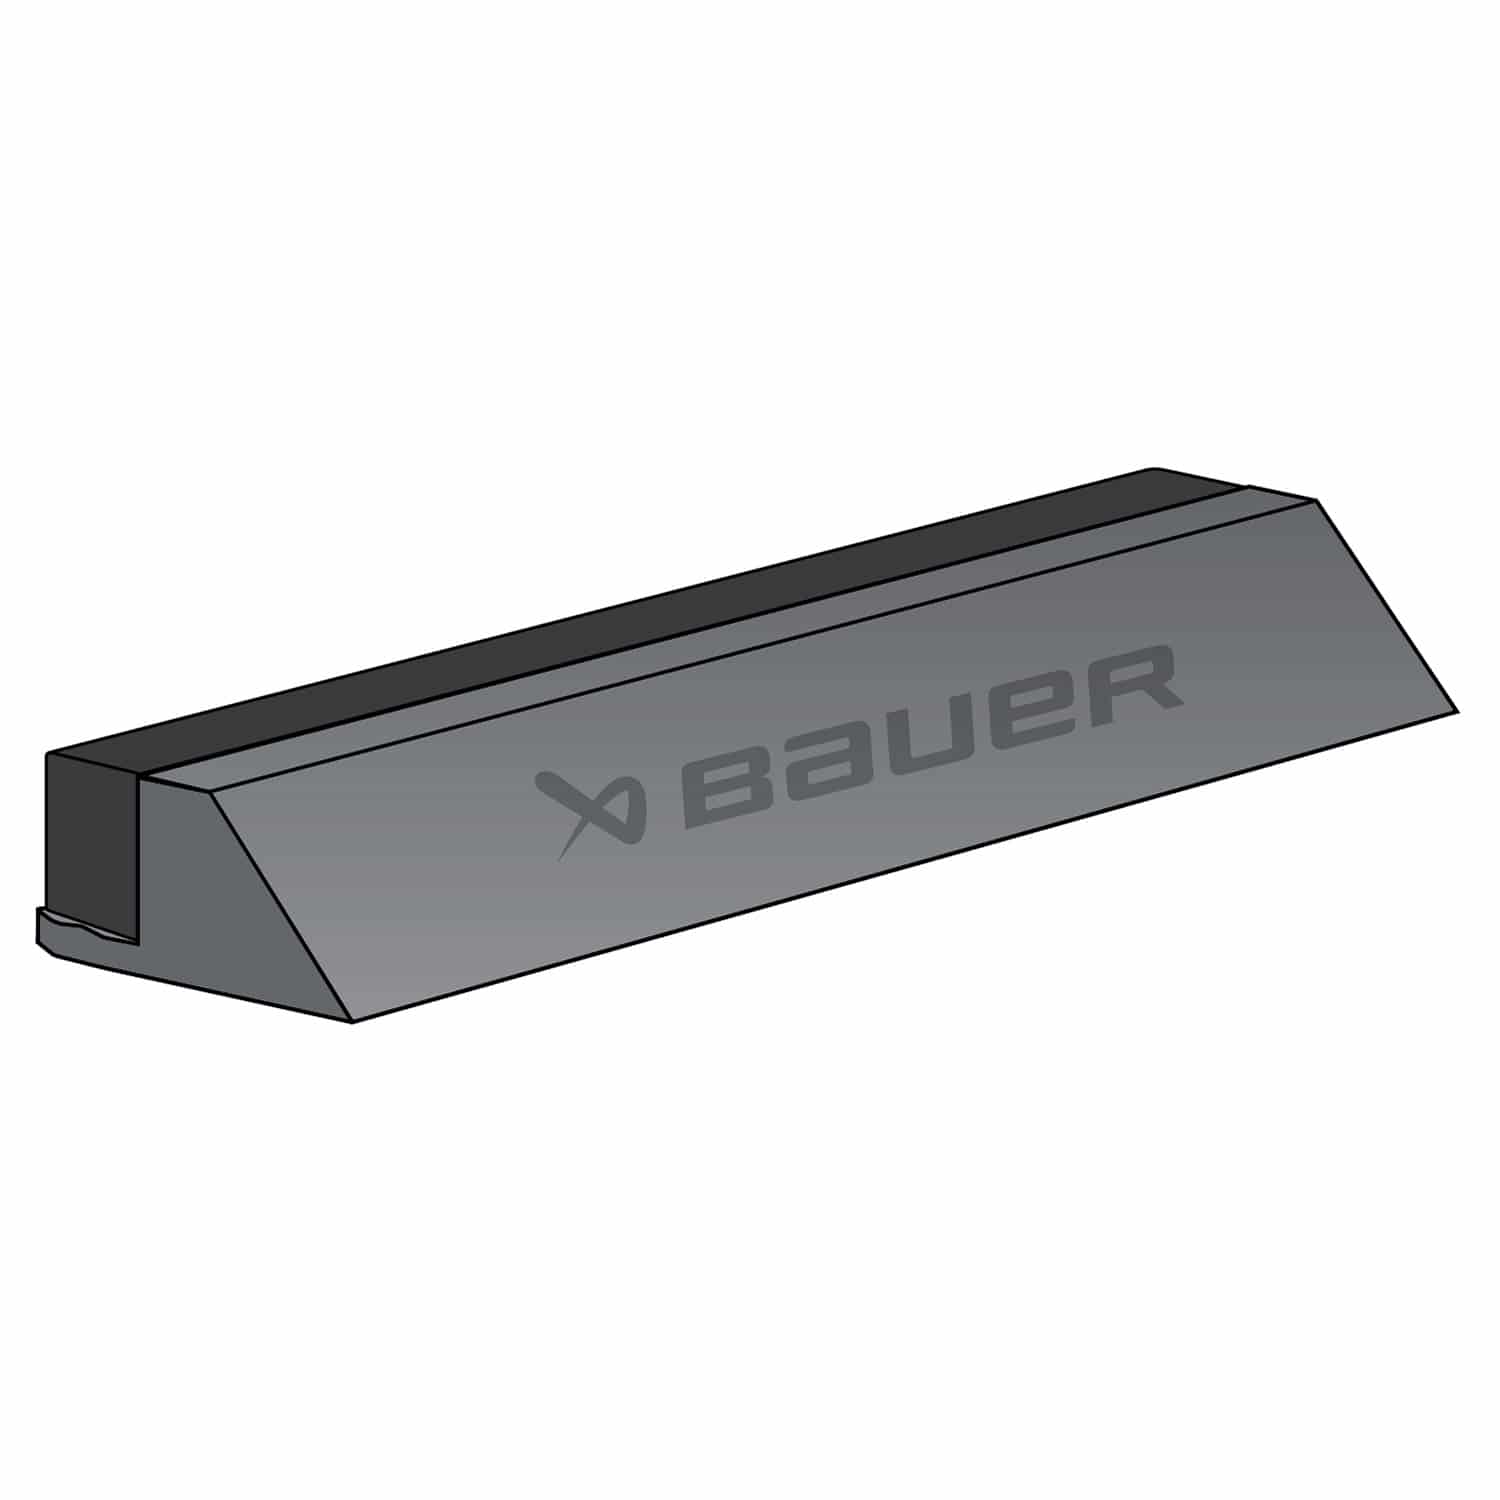 Bauer Synthetic Ice Tiles - Rubber Rebounder 